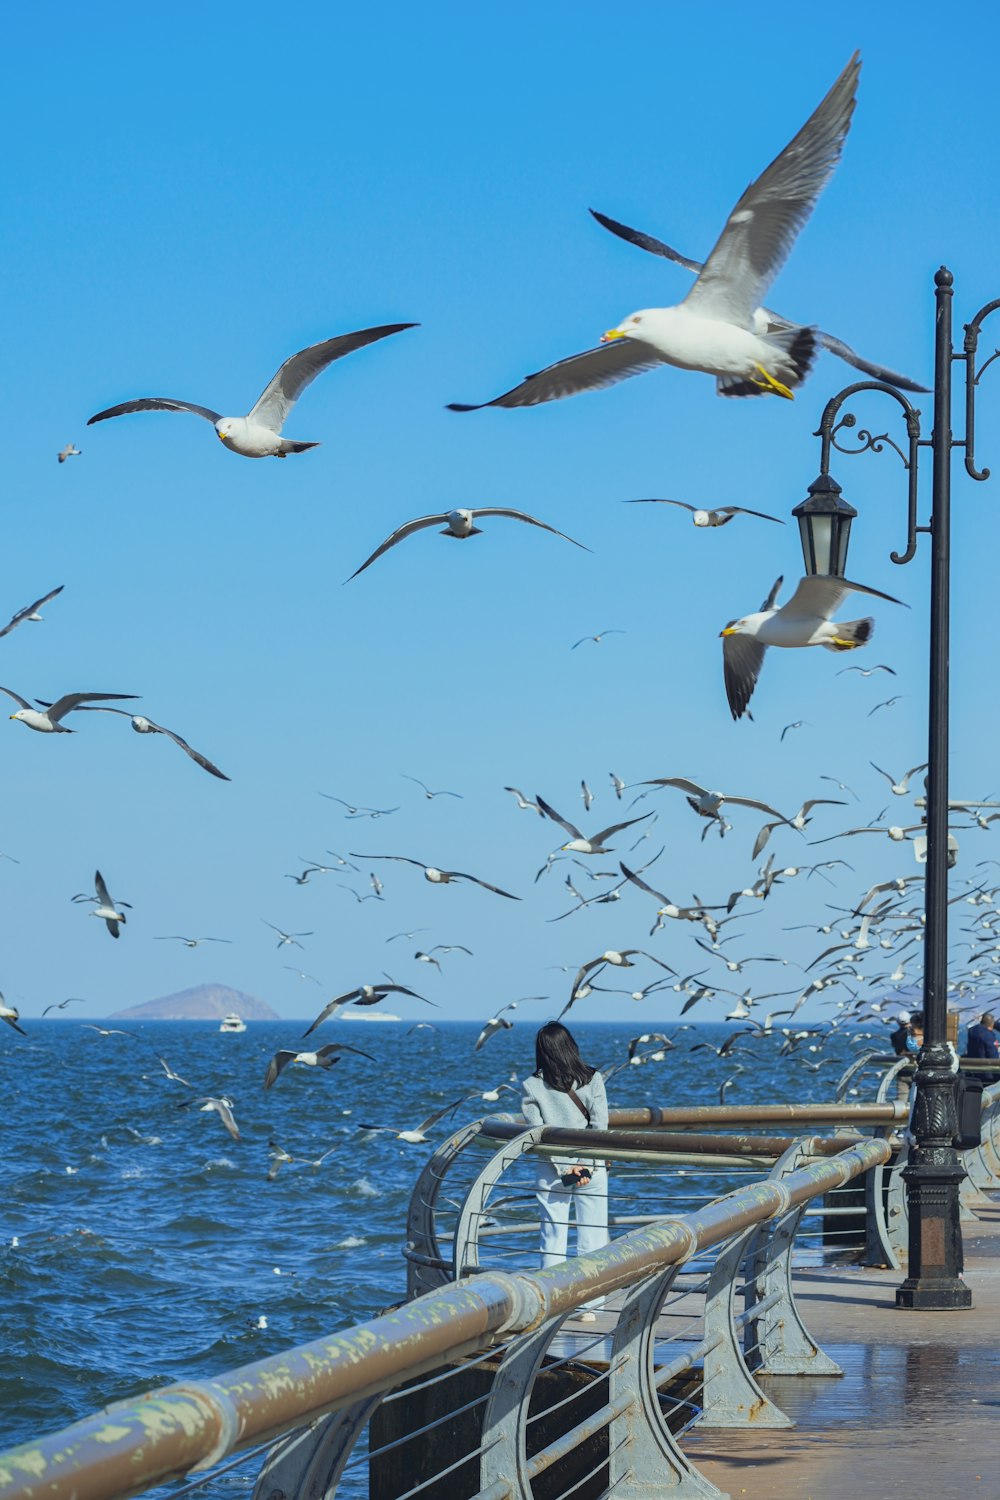 a flock of seagulls flying over the ocean next to a pier